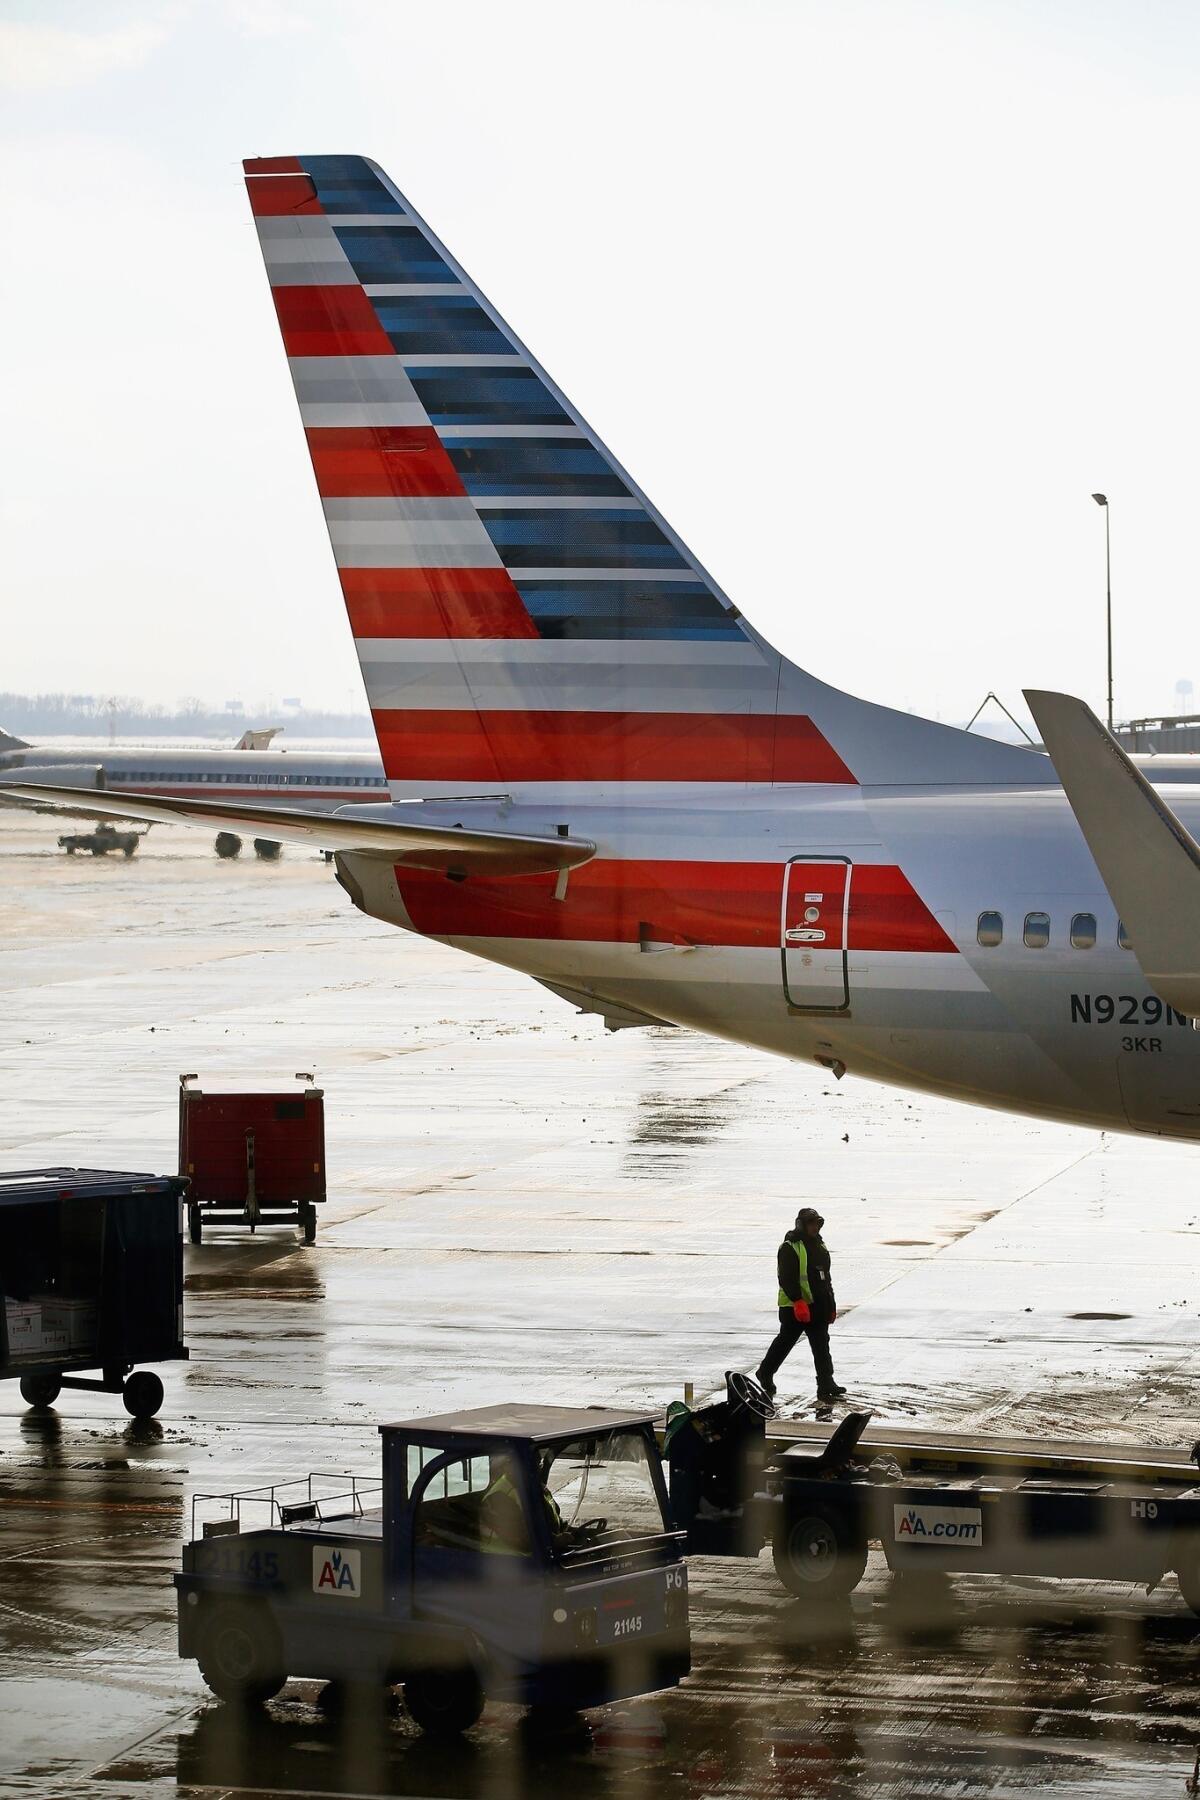 An American Airlines jet with a striped tail sits at Chicago O'Hare International Airport.